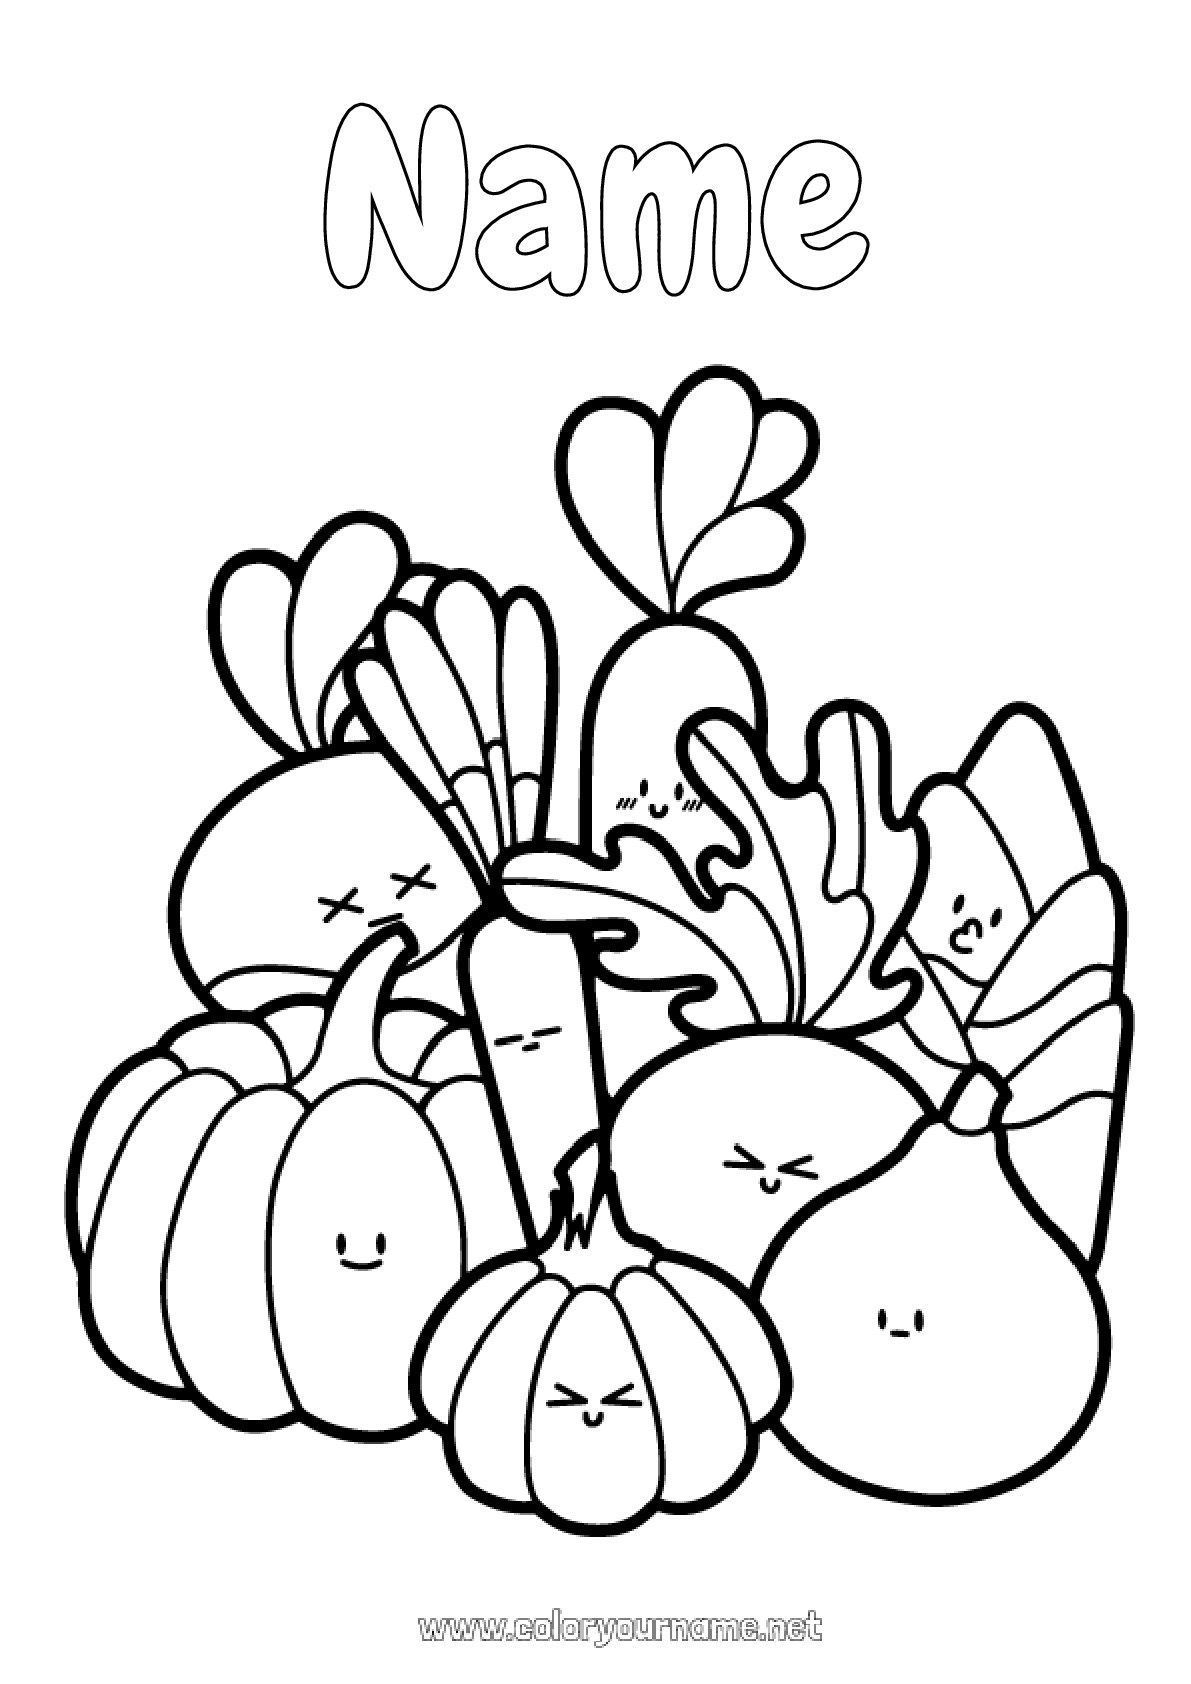 Fruits and vegetables picture to print and color - Fruits And Vegetables  Kids Coloring Pages